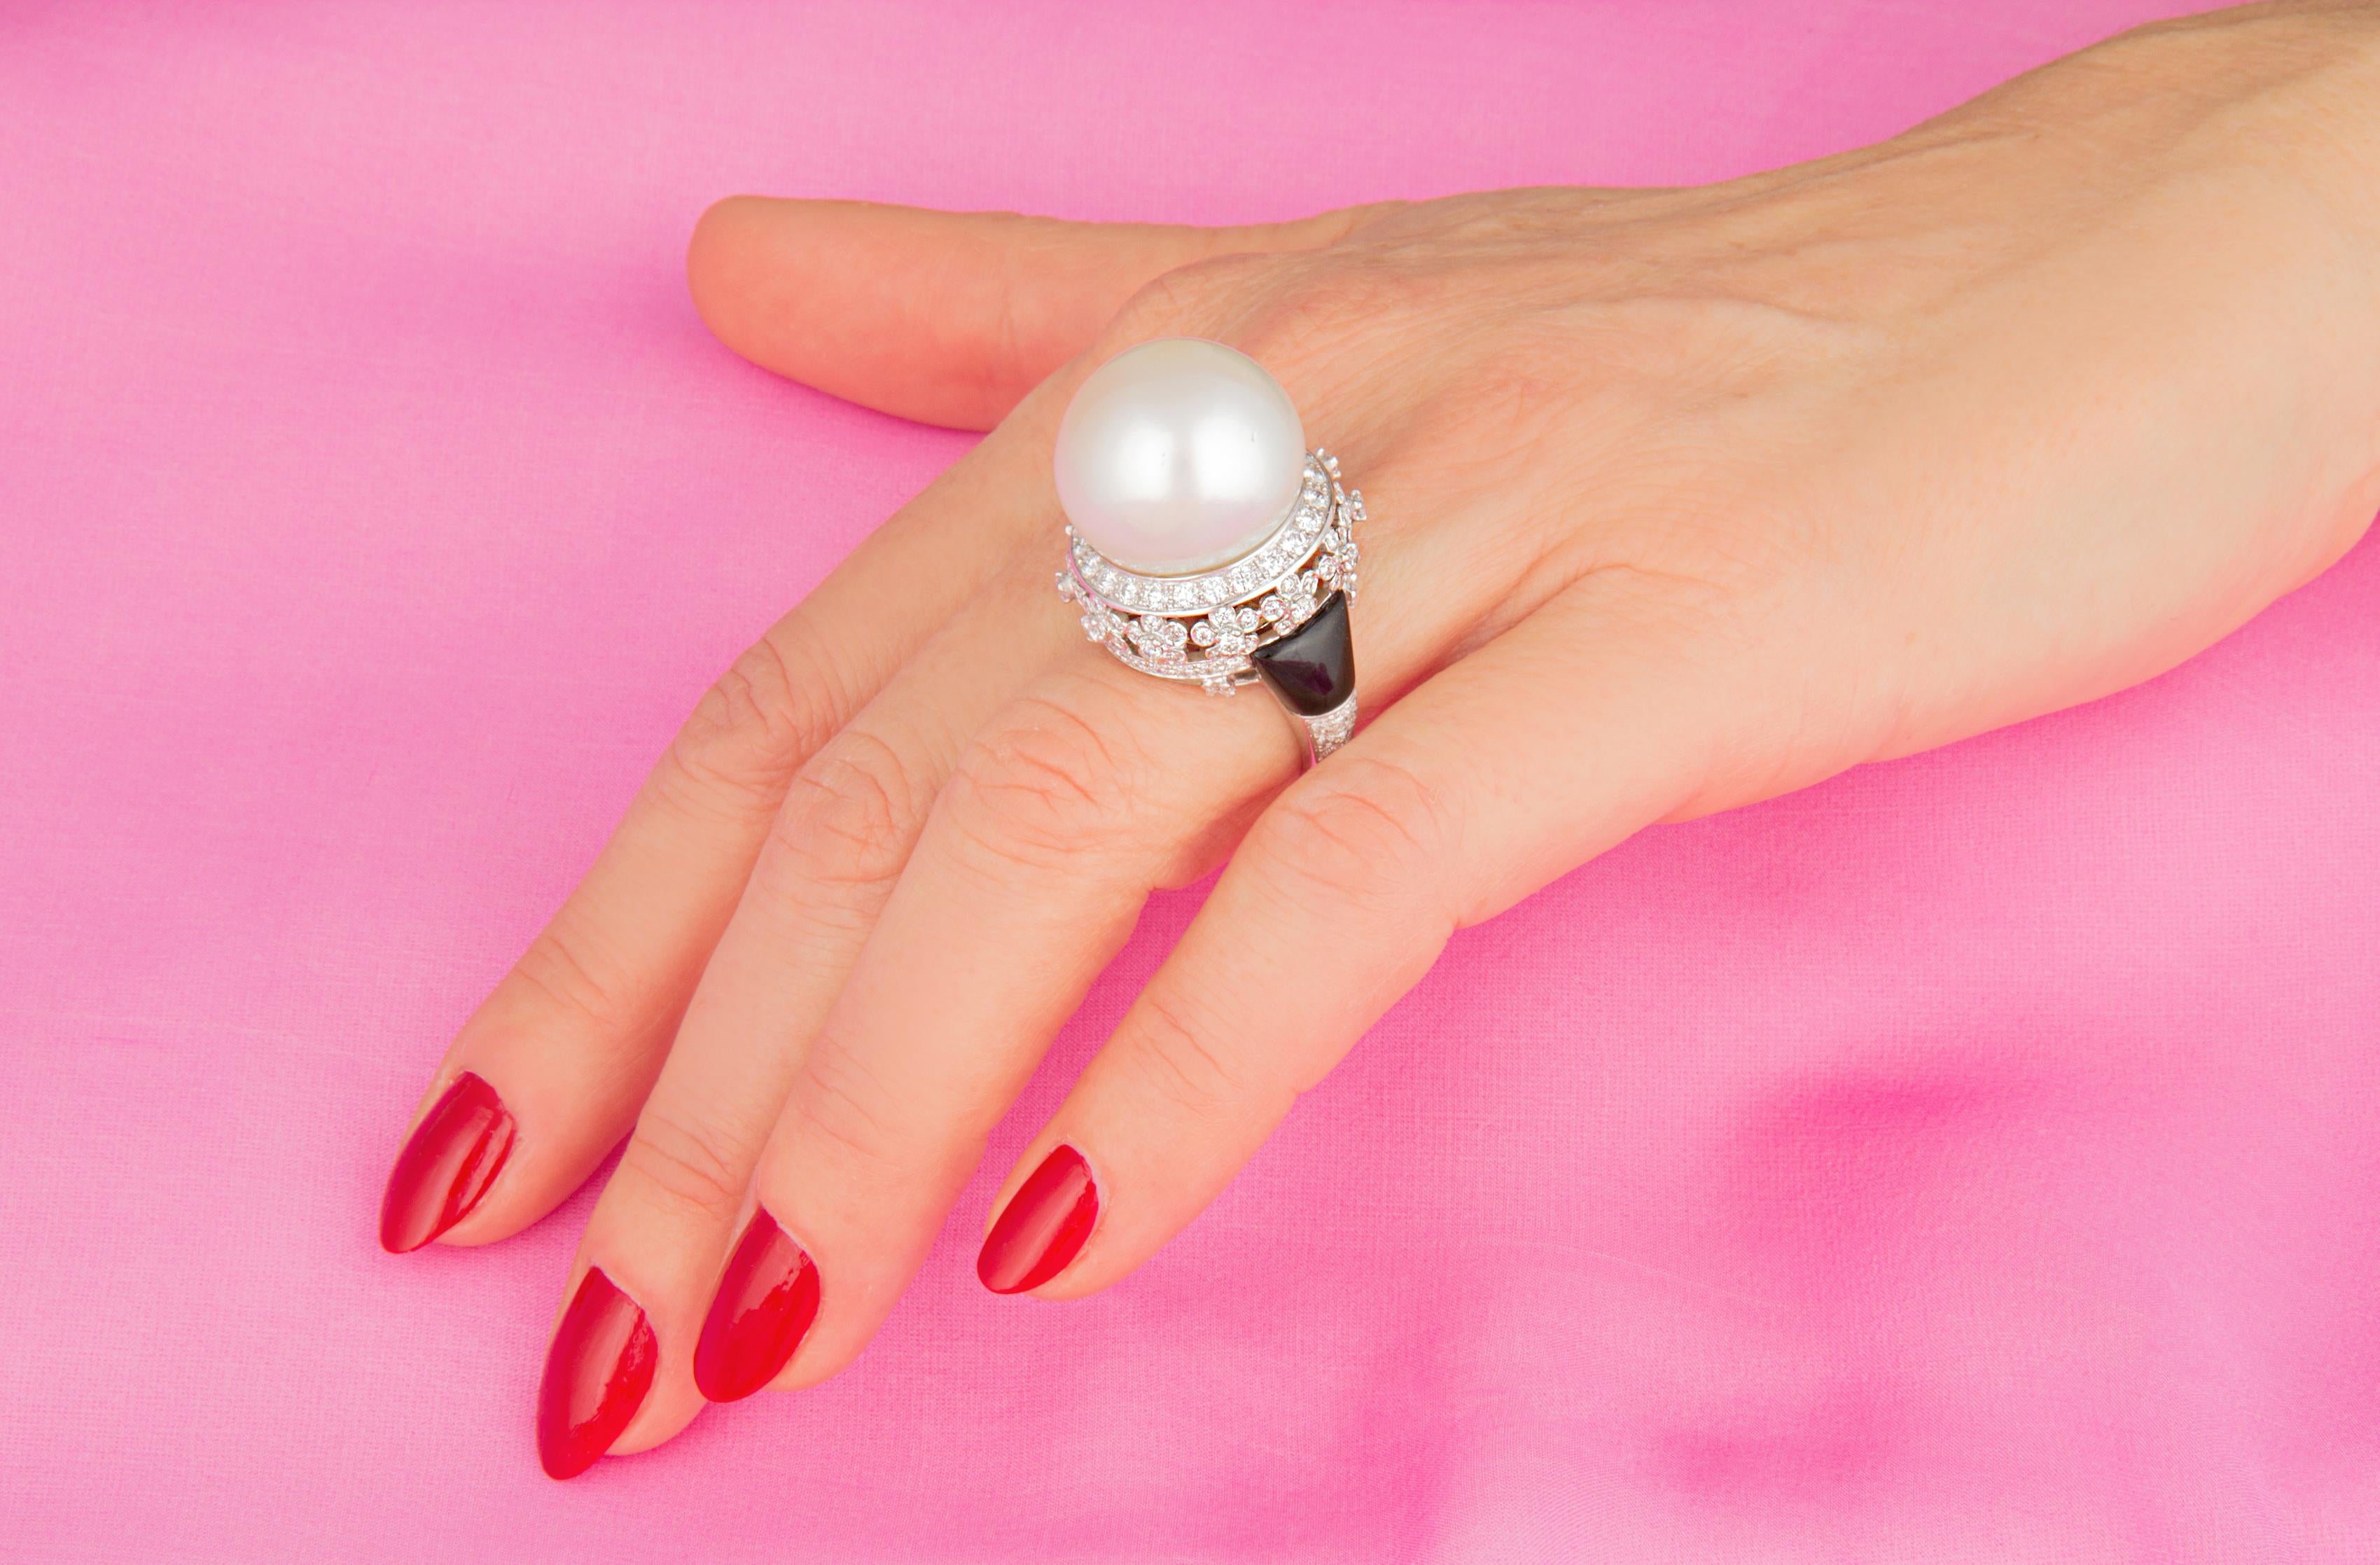 This pearl and diamond ring features an exceptionally large and beautiful South Sea pearl of 19mm diameter. The pearl is untreated. It displays a fine nacre and its natural color and luster have not been enhanced in any way. The pearl is perched on